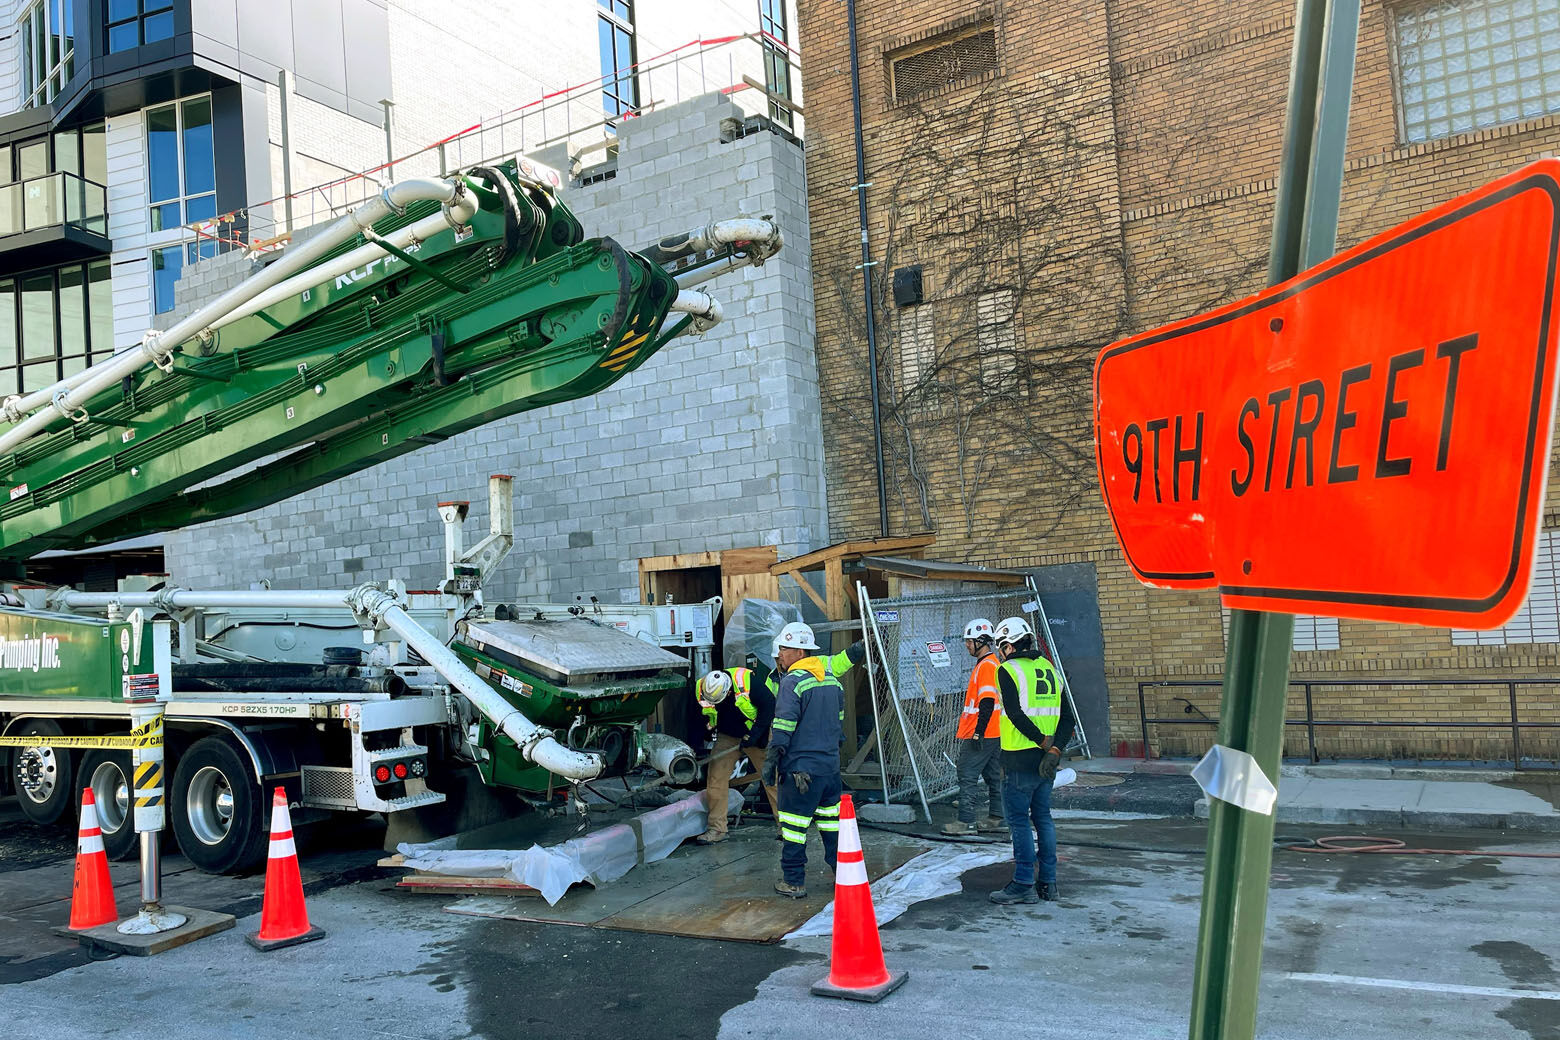 <p>The Atlantis will be located adjacent to the current 9:30 location, at the same address of the former Satellite Room. That building has been torn down and a new one has been erected.</p>
<p>Crews on Wednesday were seen working at the site.</p>
<p>(It wasn&#8217;t clear from the street whether the hallway in the new venue will hark back to the long hallway at the old club on F Street that was frequently plastered with flyers for upcoming shows)</p>
<p>&nbsp;</p>
